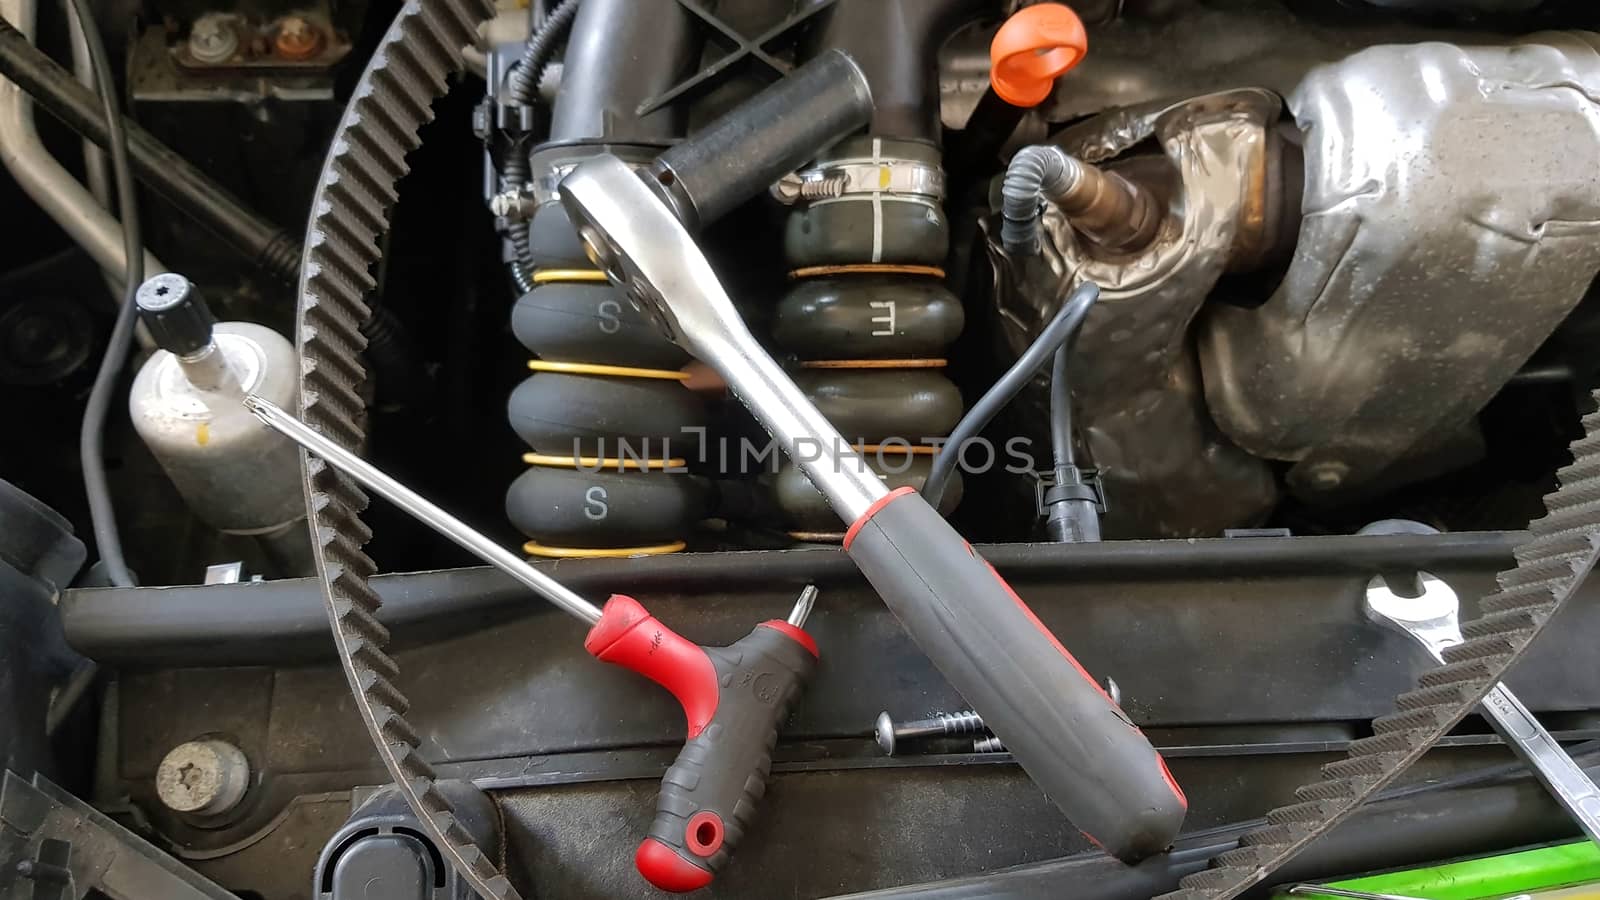 Garage tools on car engine: screw, spanner and ratchet near timing belt